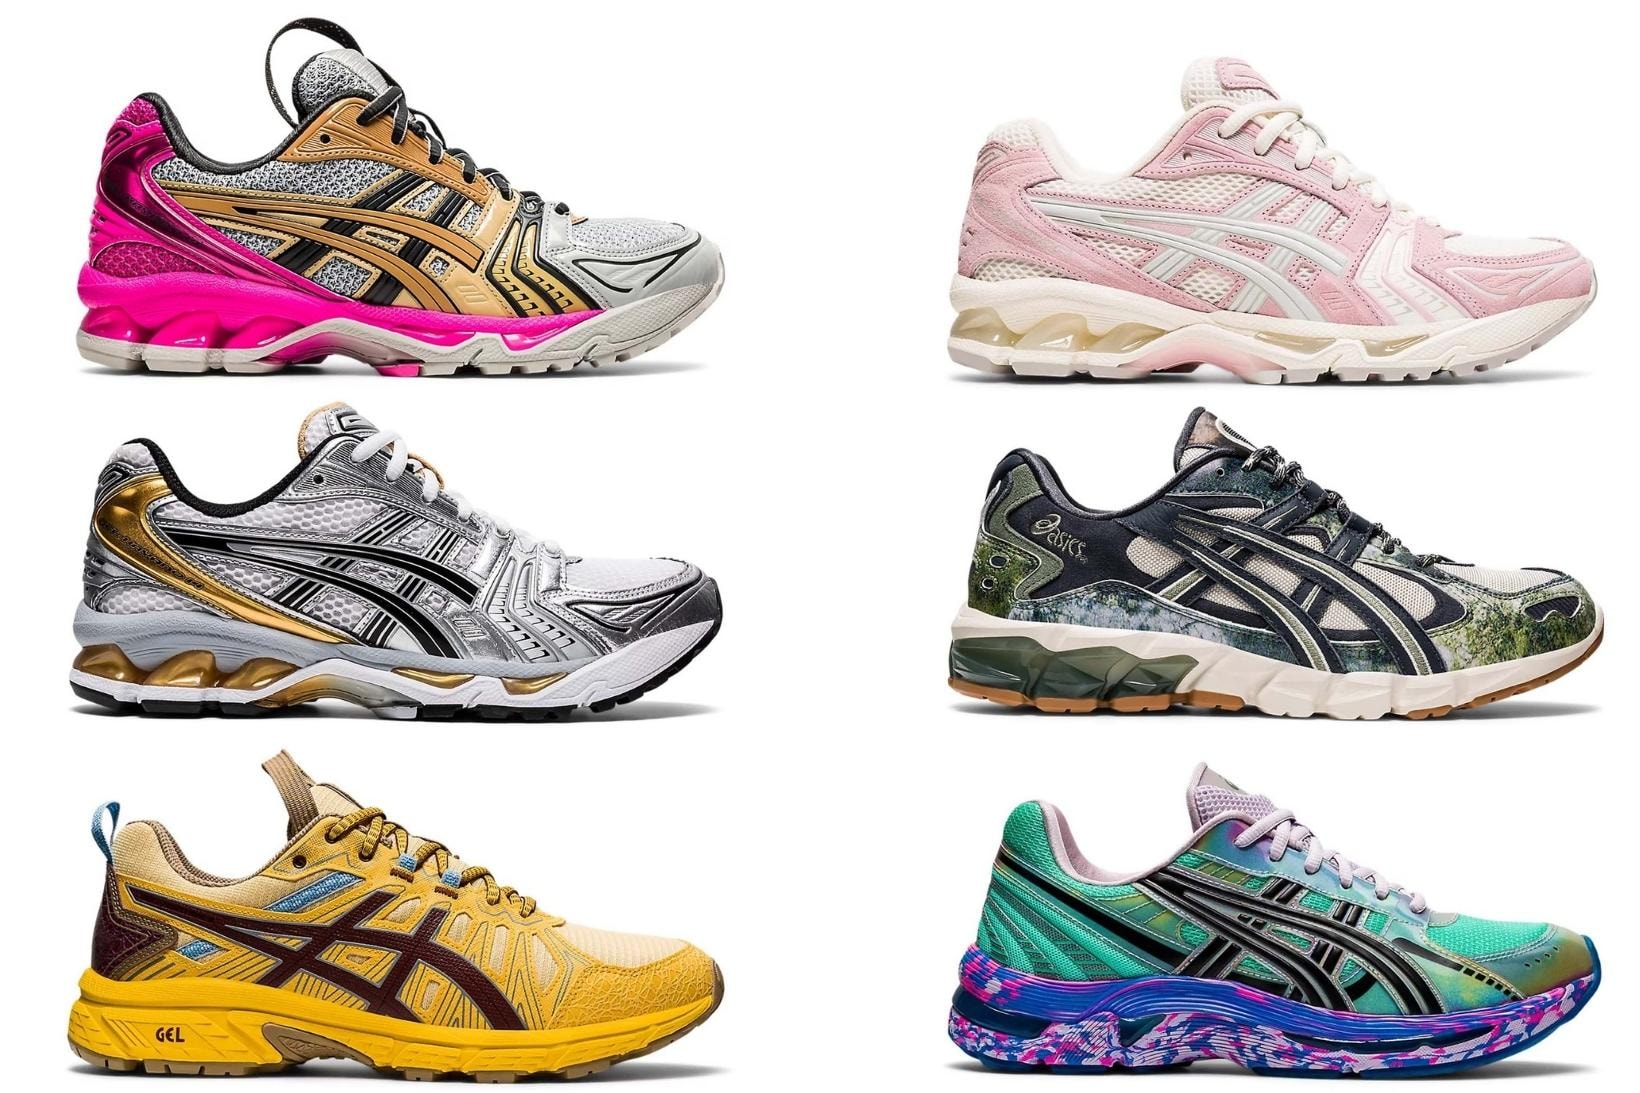 6 BEST ASICS RUNNING SHOES FOR WOMEN: A COMPREHENSIVE GUIDE